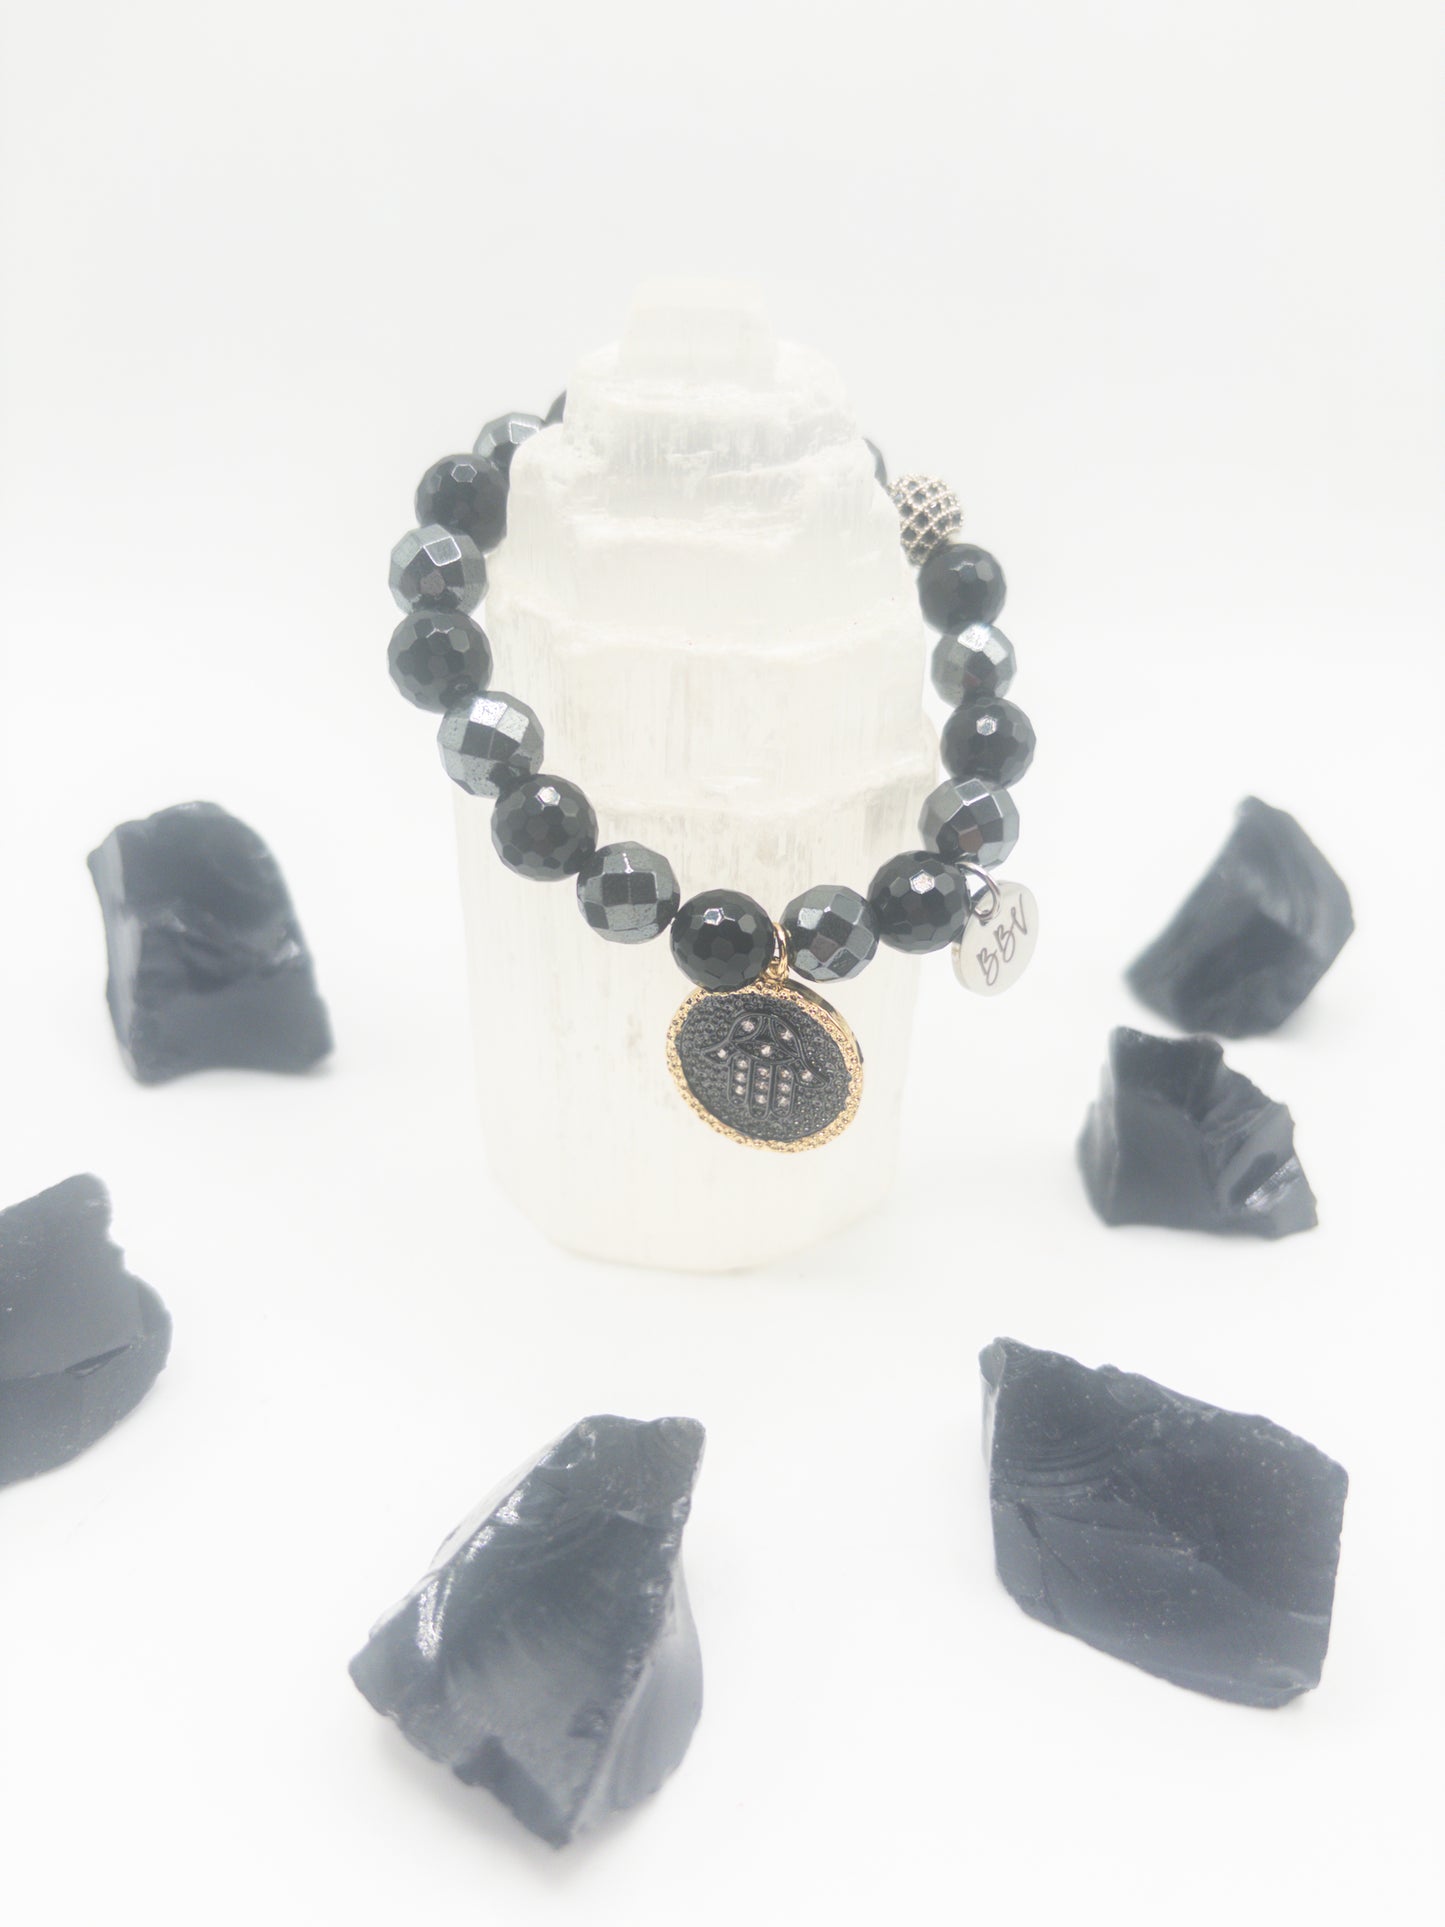 BBV Luxe Faceted Hematite & Black Onyx Crystal Bracelet With Charm